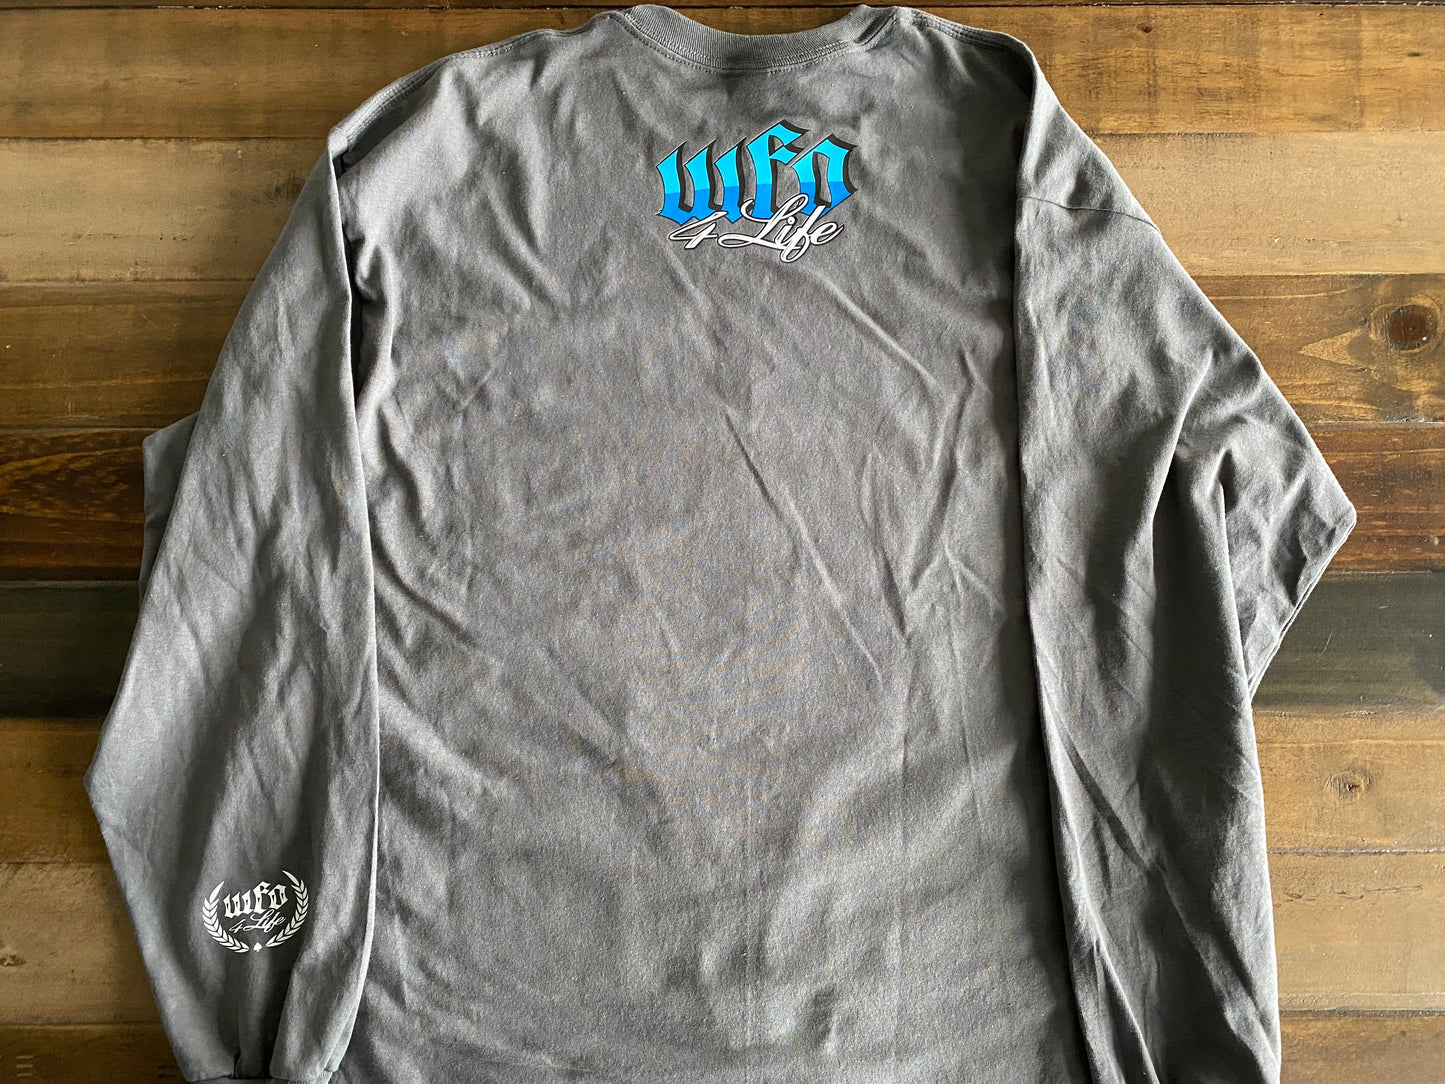 WFO 4 LIFE ™ - "Live Free Or Die" - Long Sleeve T-Shirt